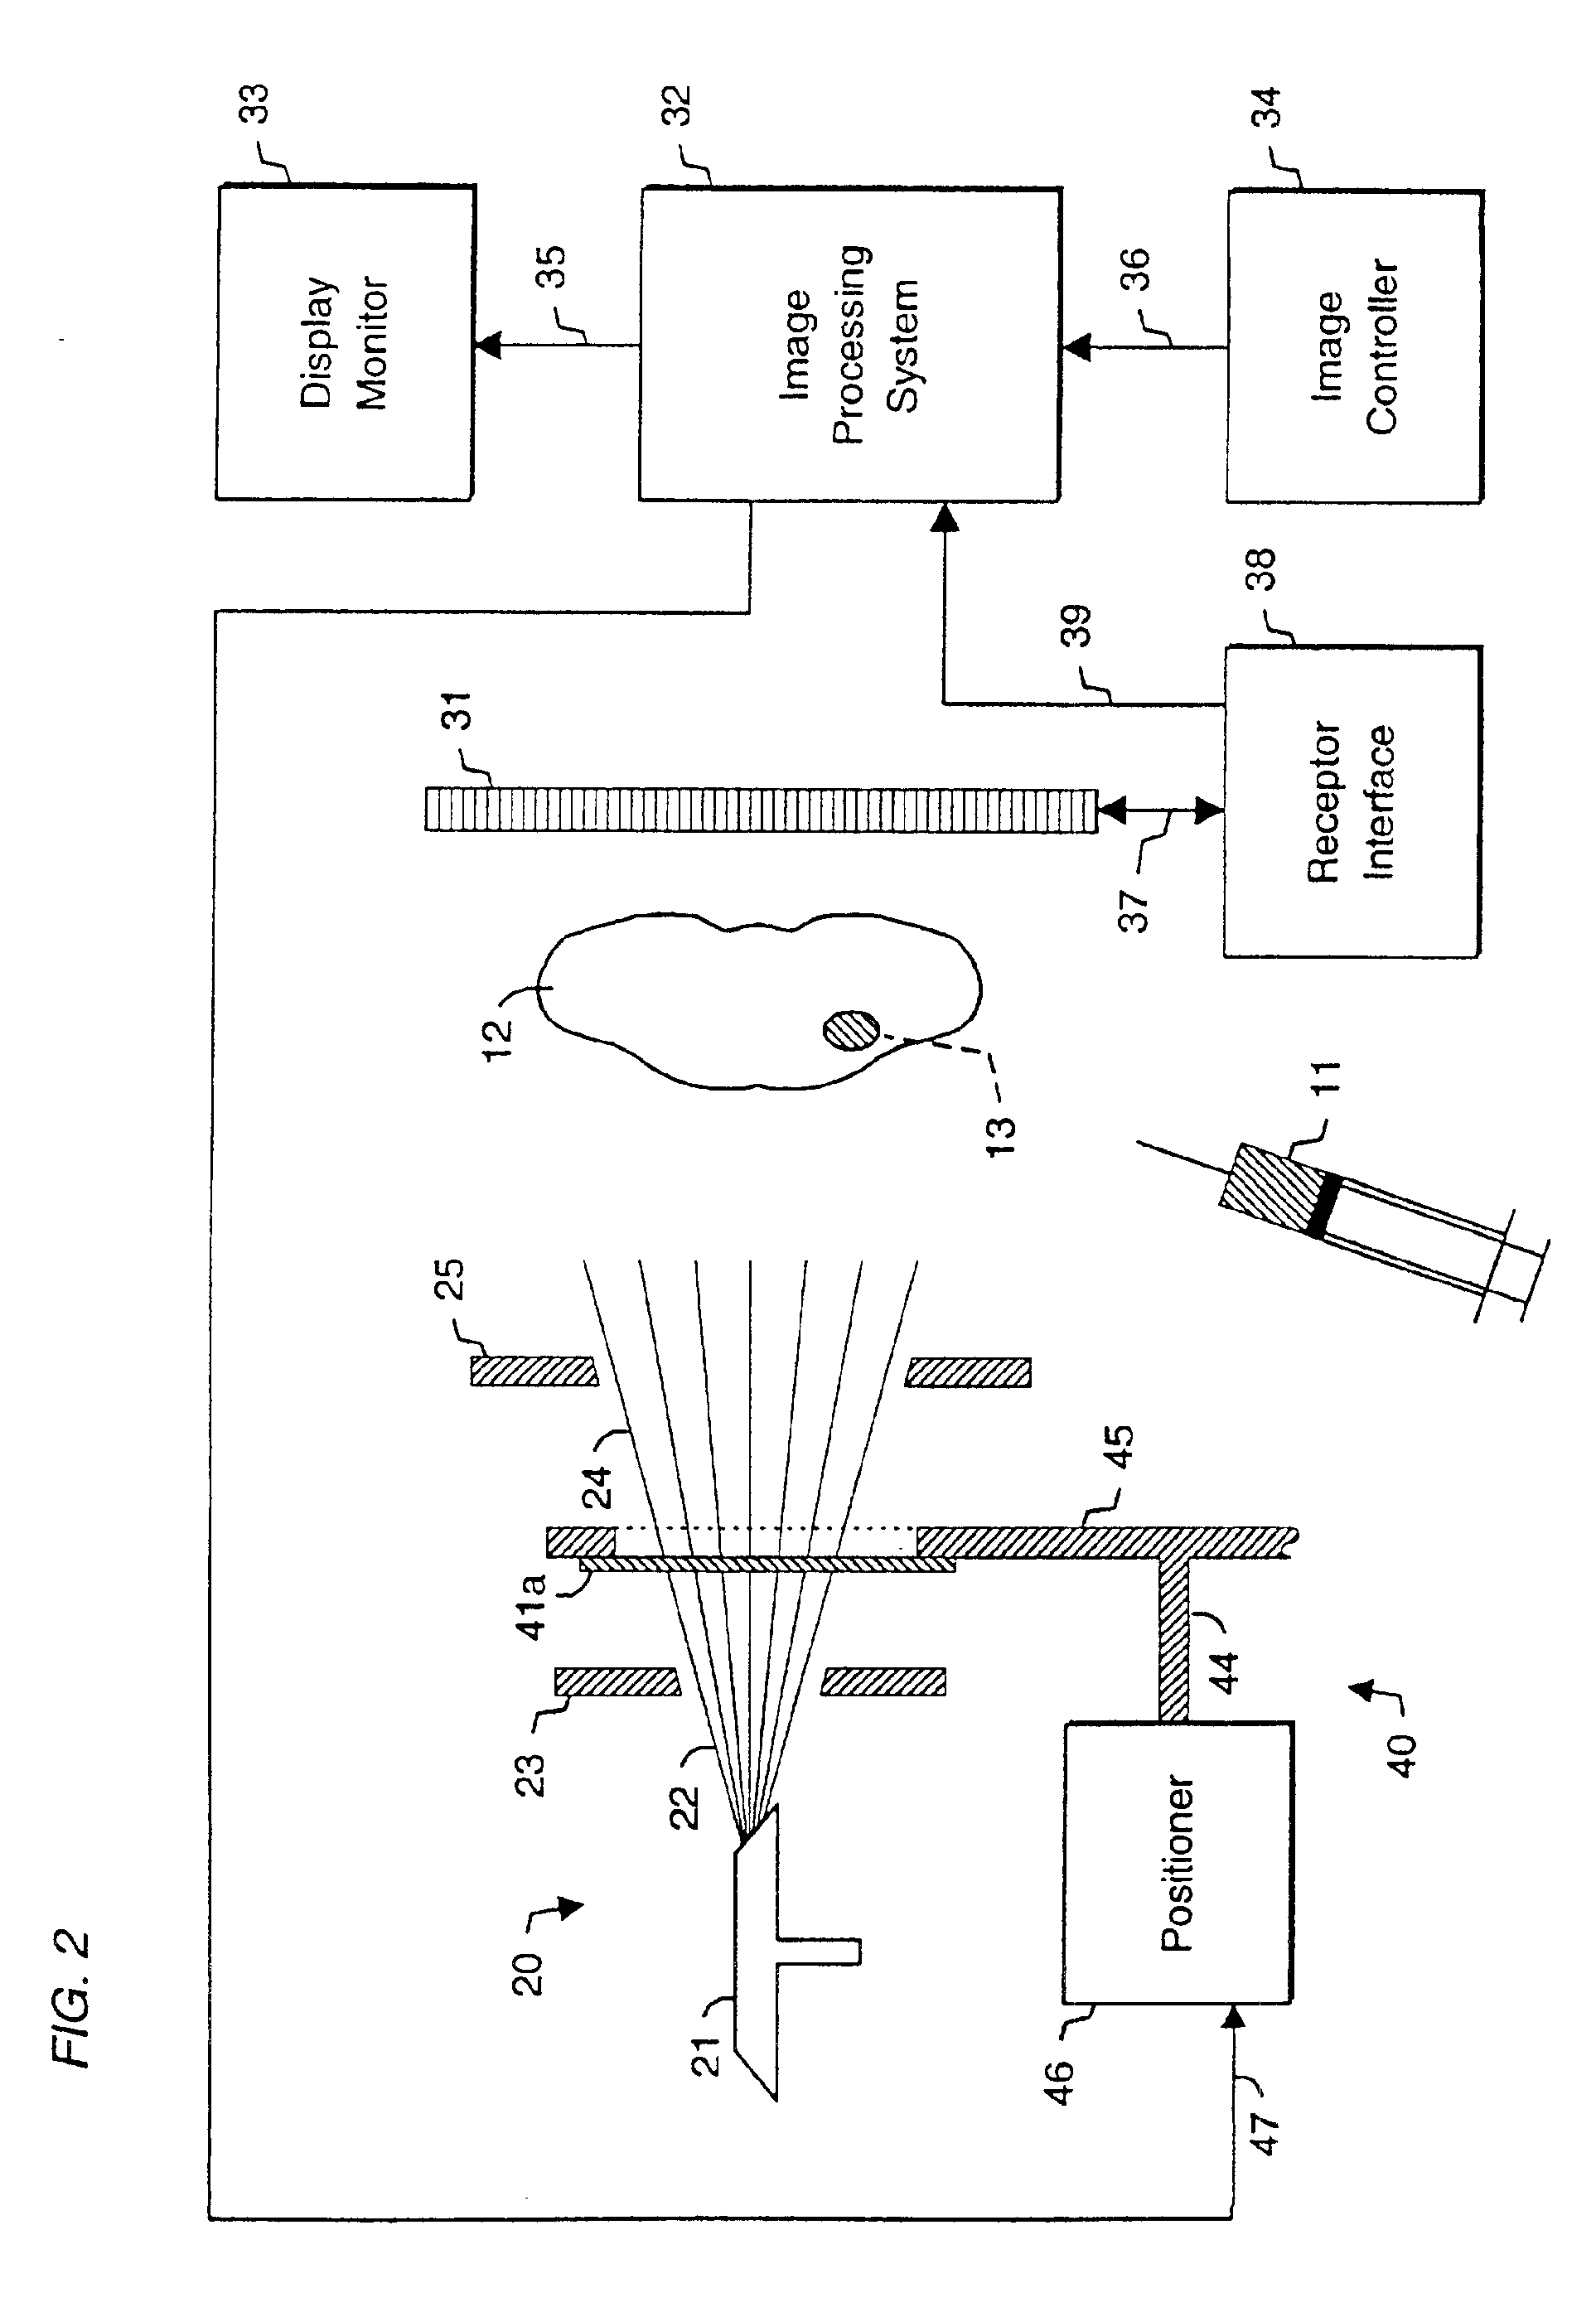 System and method for radiographic imaging of tissue